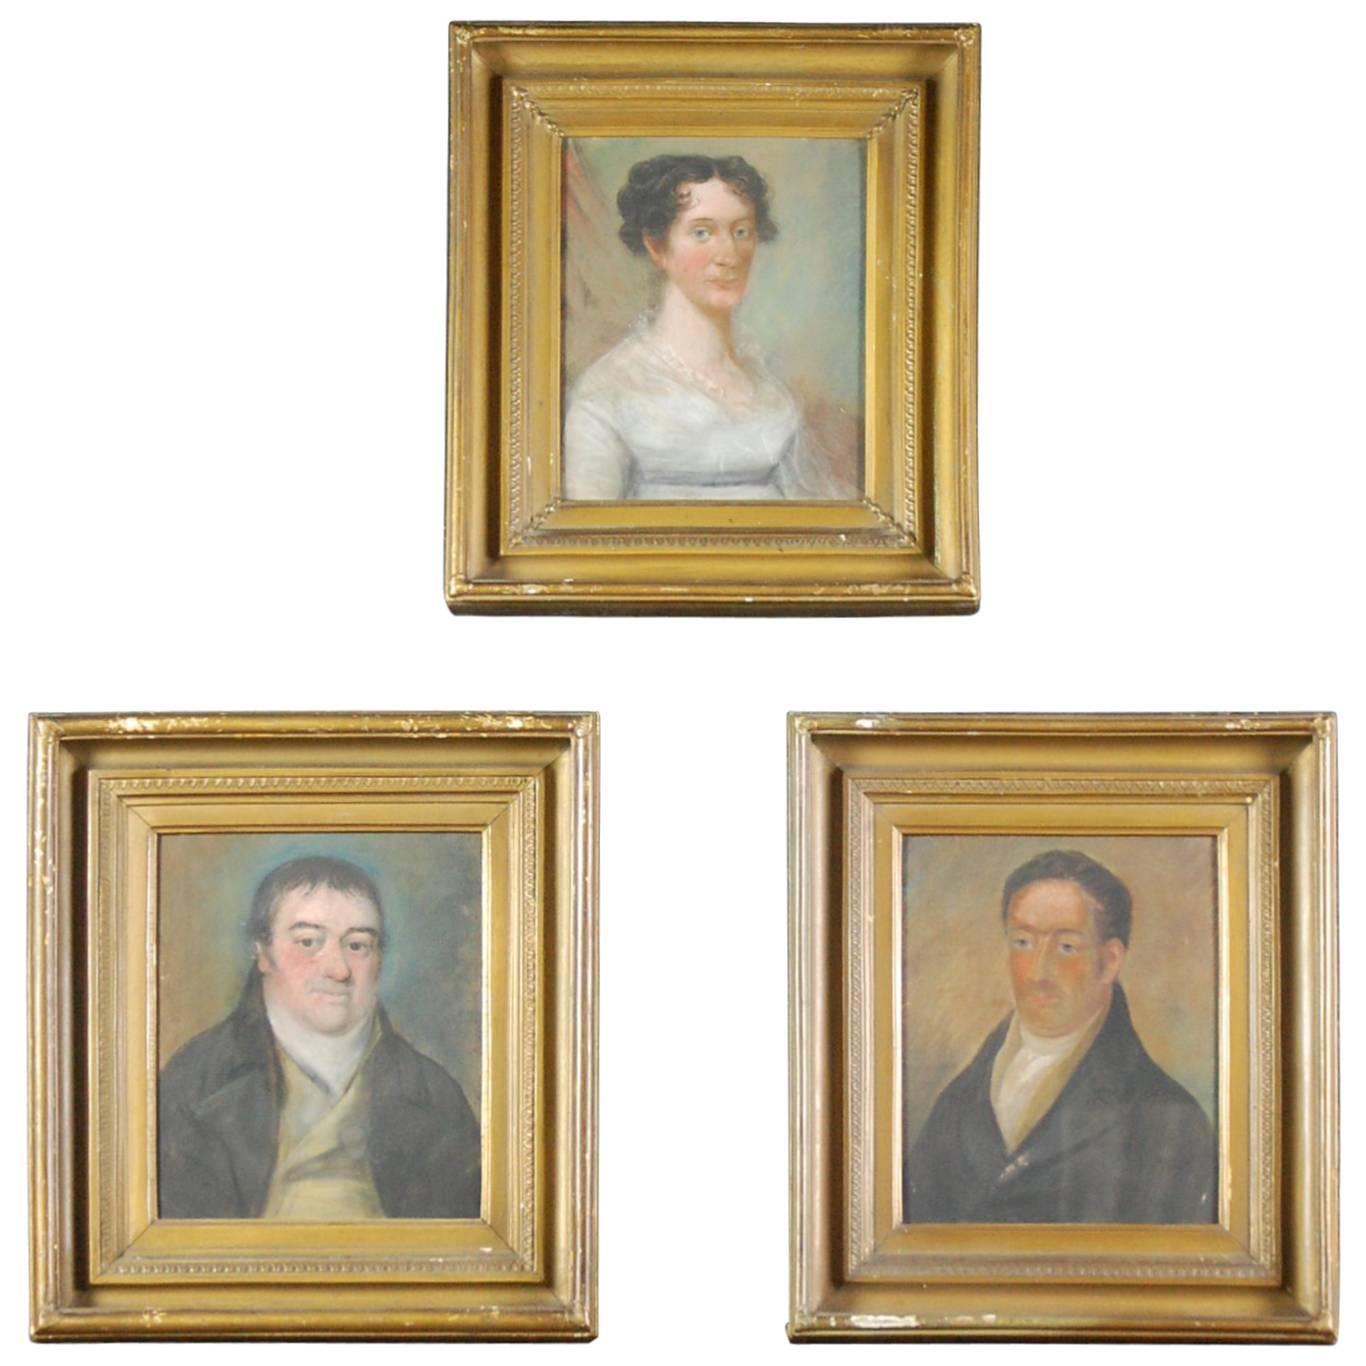 Collection of Three Early 19th Century Naive Family Pastel Portraits